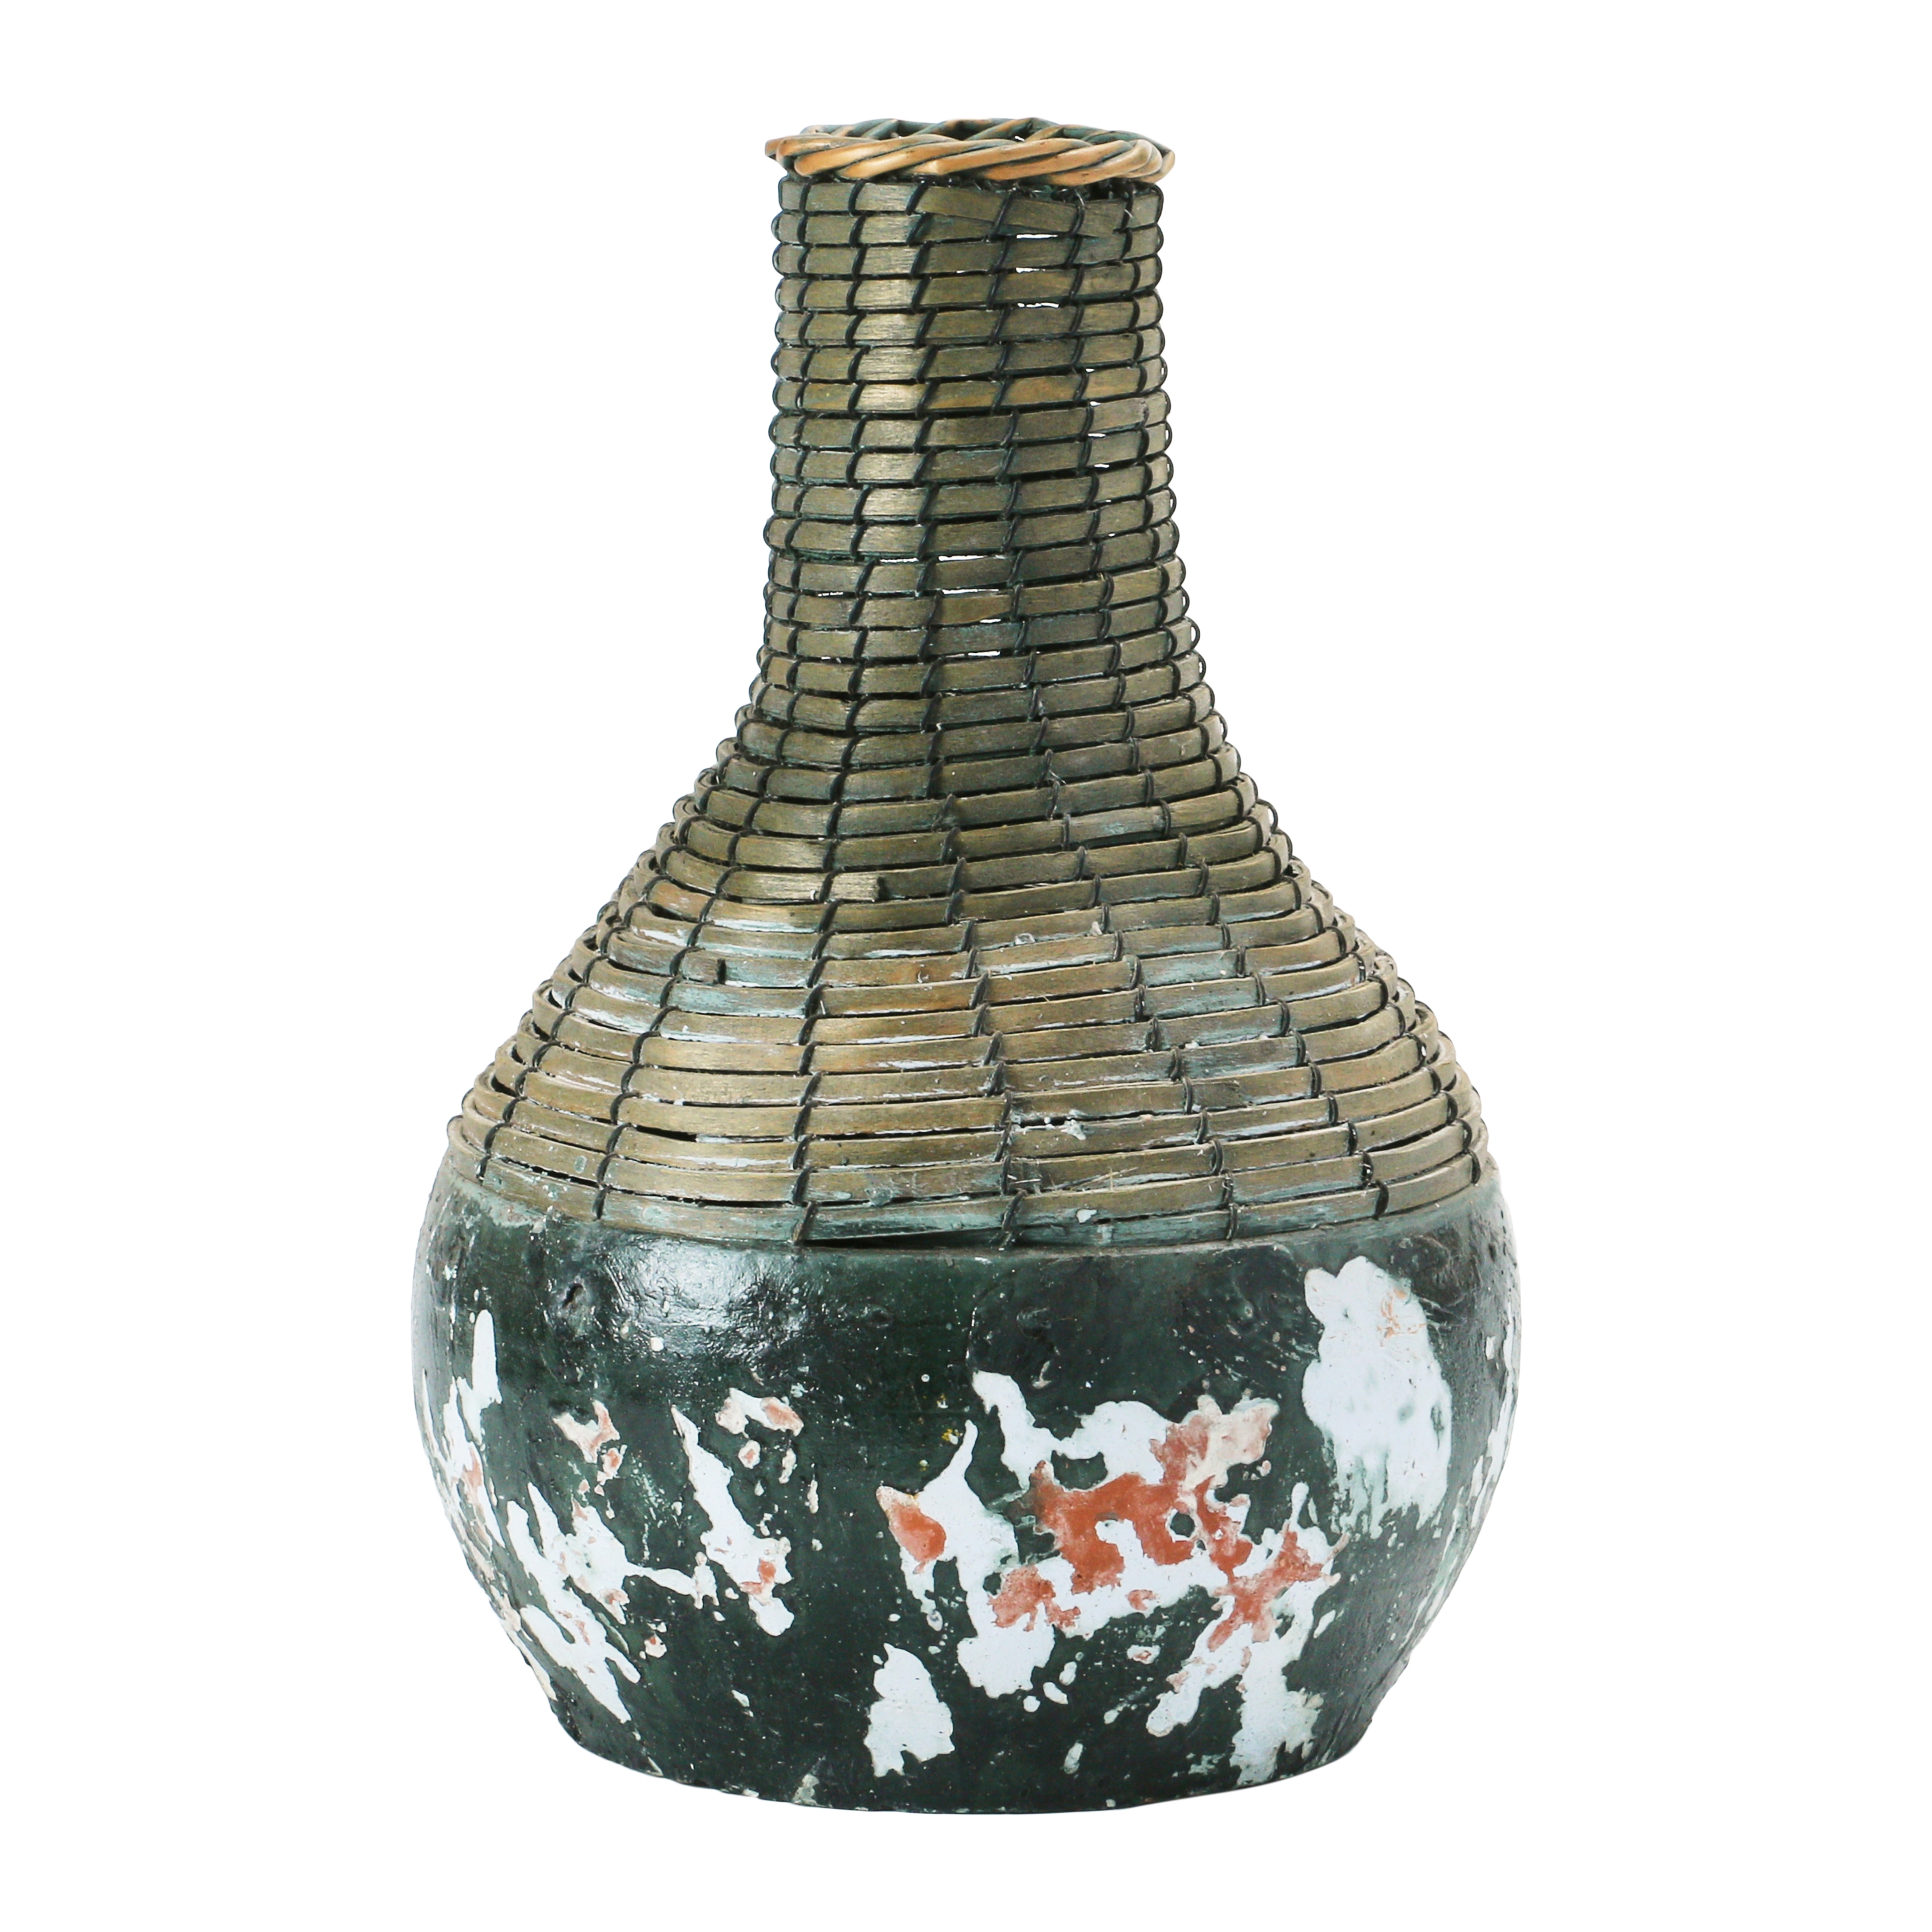 Hand-Woven Rattan & Clay Vase, Distressed Black (Each One Will Vary) - Image 0